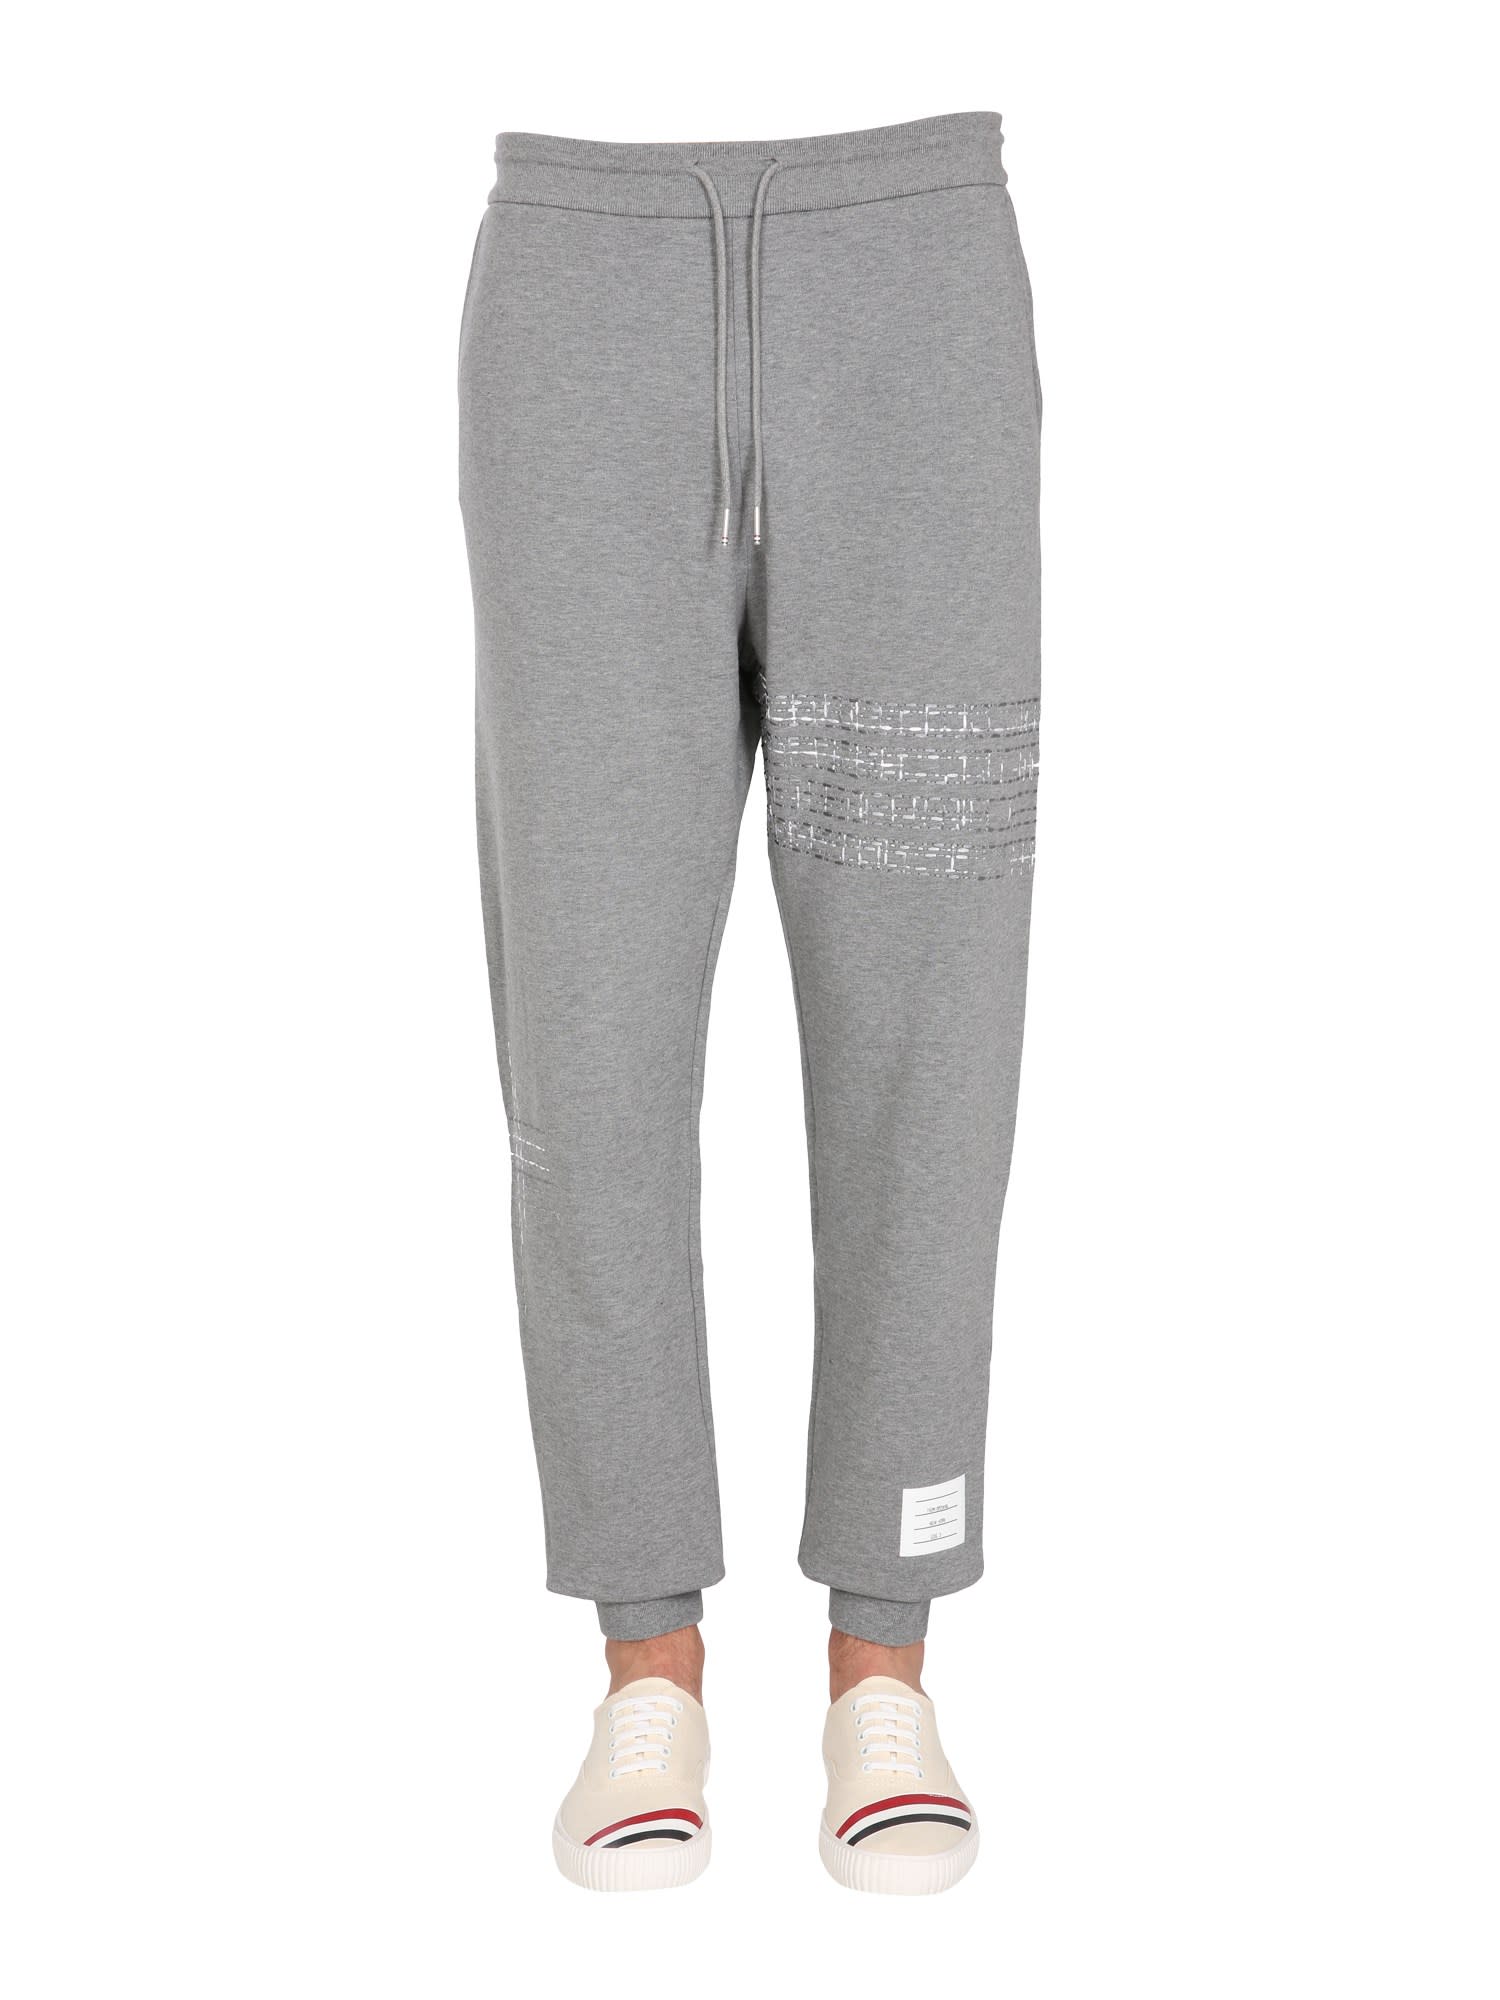 Thom Browne Embroidered Jogging Pants